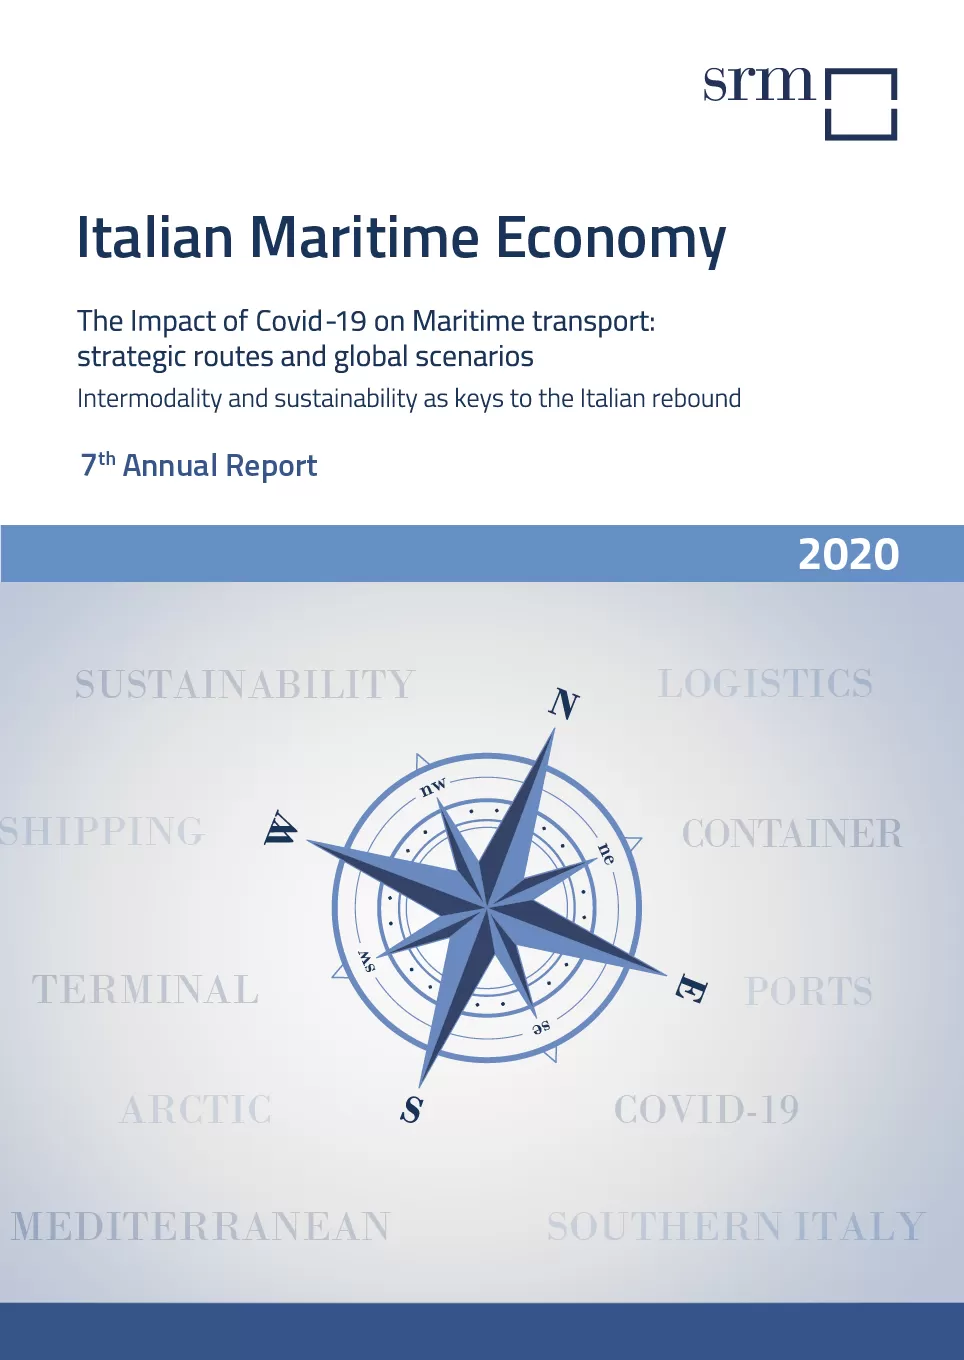 Italian Maritime Economy. The impact of Covid-19 on maritime transport: strategic routes and global scenarios. Intermodality and sustainability as keys to the Italian recovery